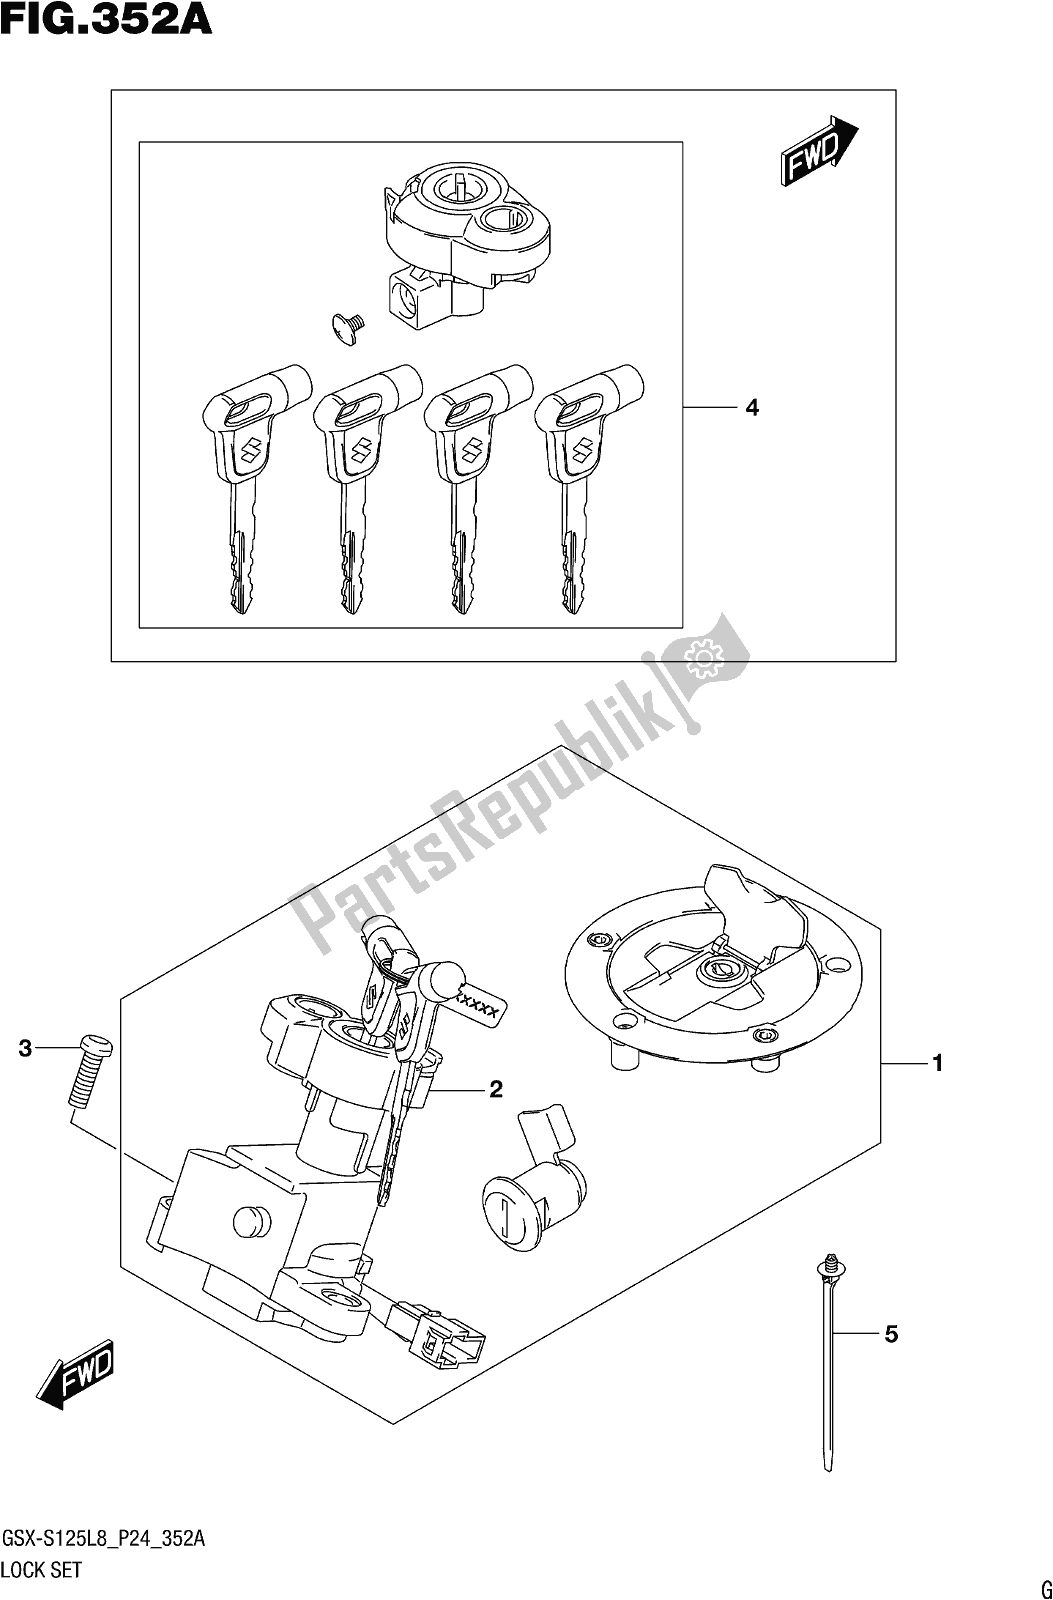 All parts for the Fig. 352a Lock Set of the Suzuki Gsx-s 125 ML 2018